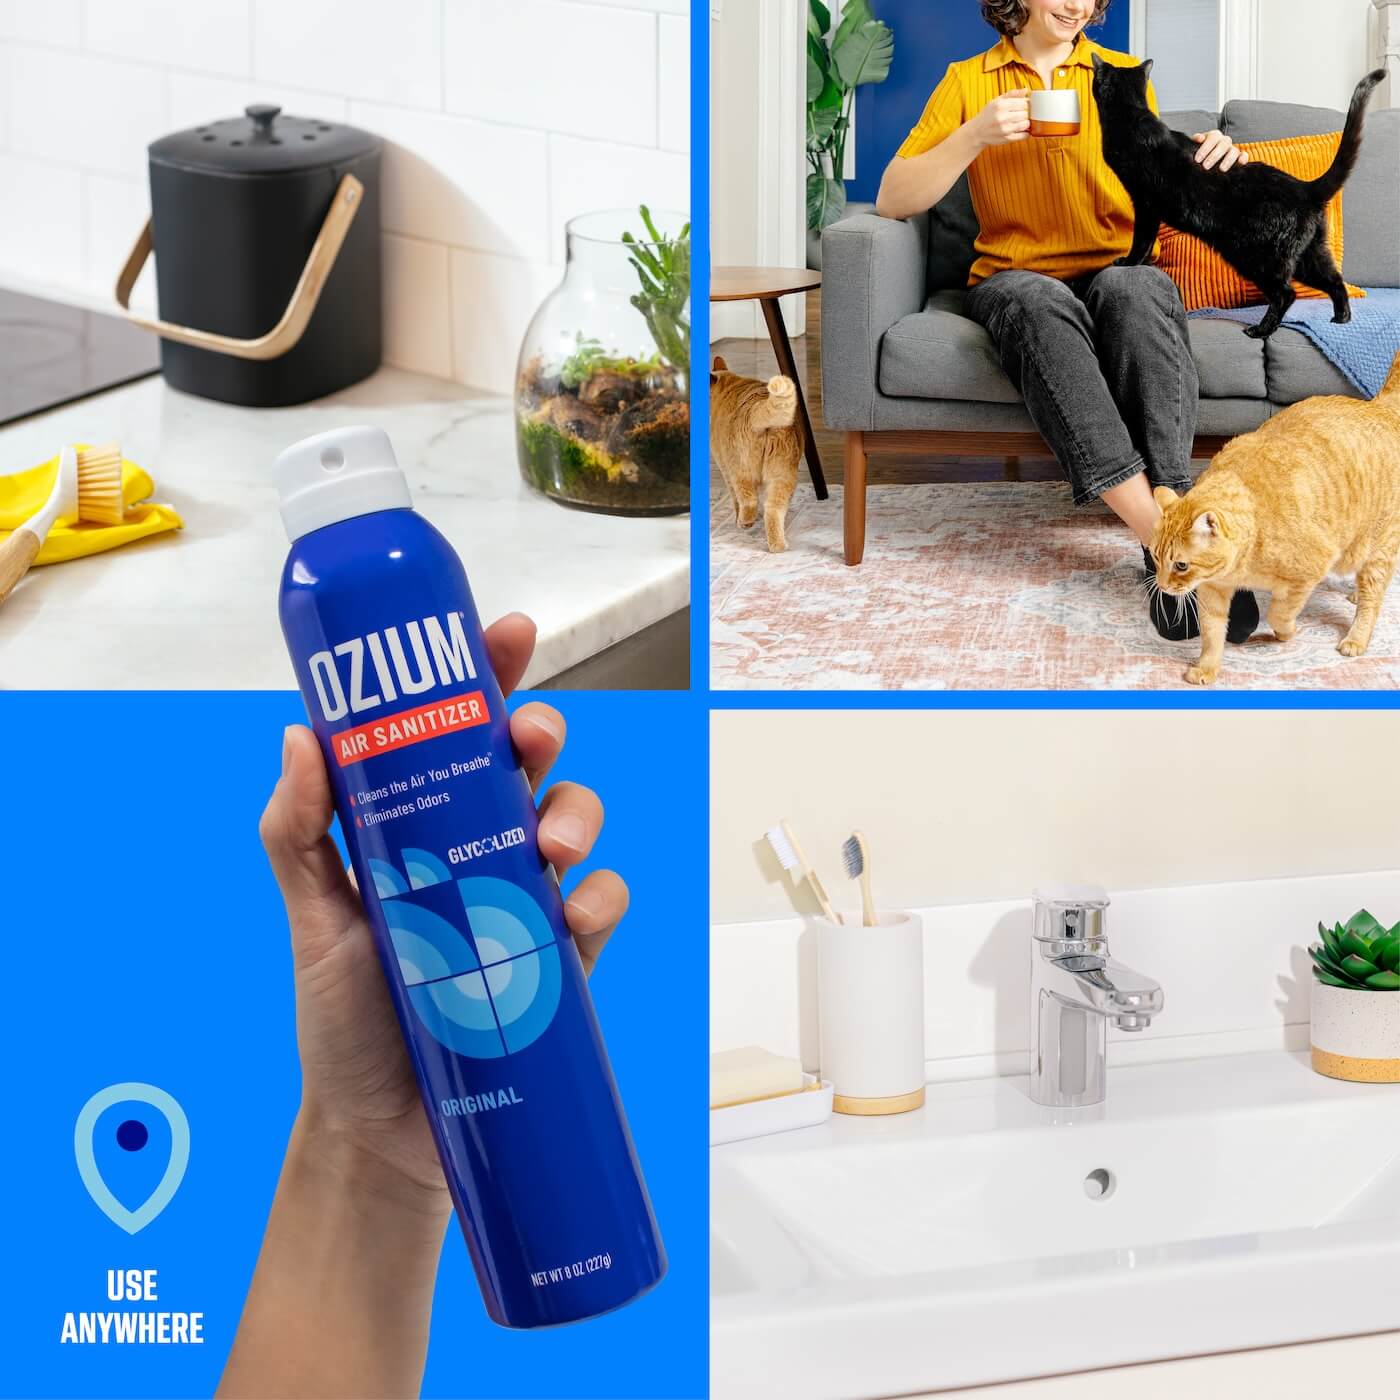 Use Anywhere. Picture of a kitchen, bathroom, living room and a hand holding a can of OZIUM